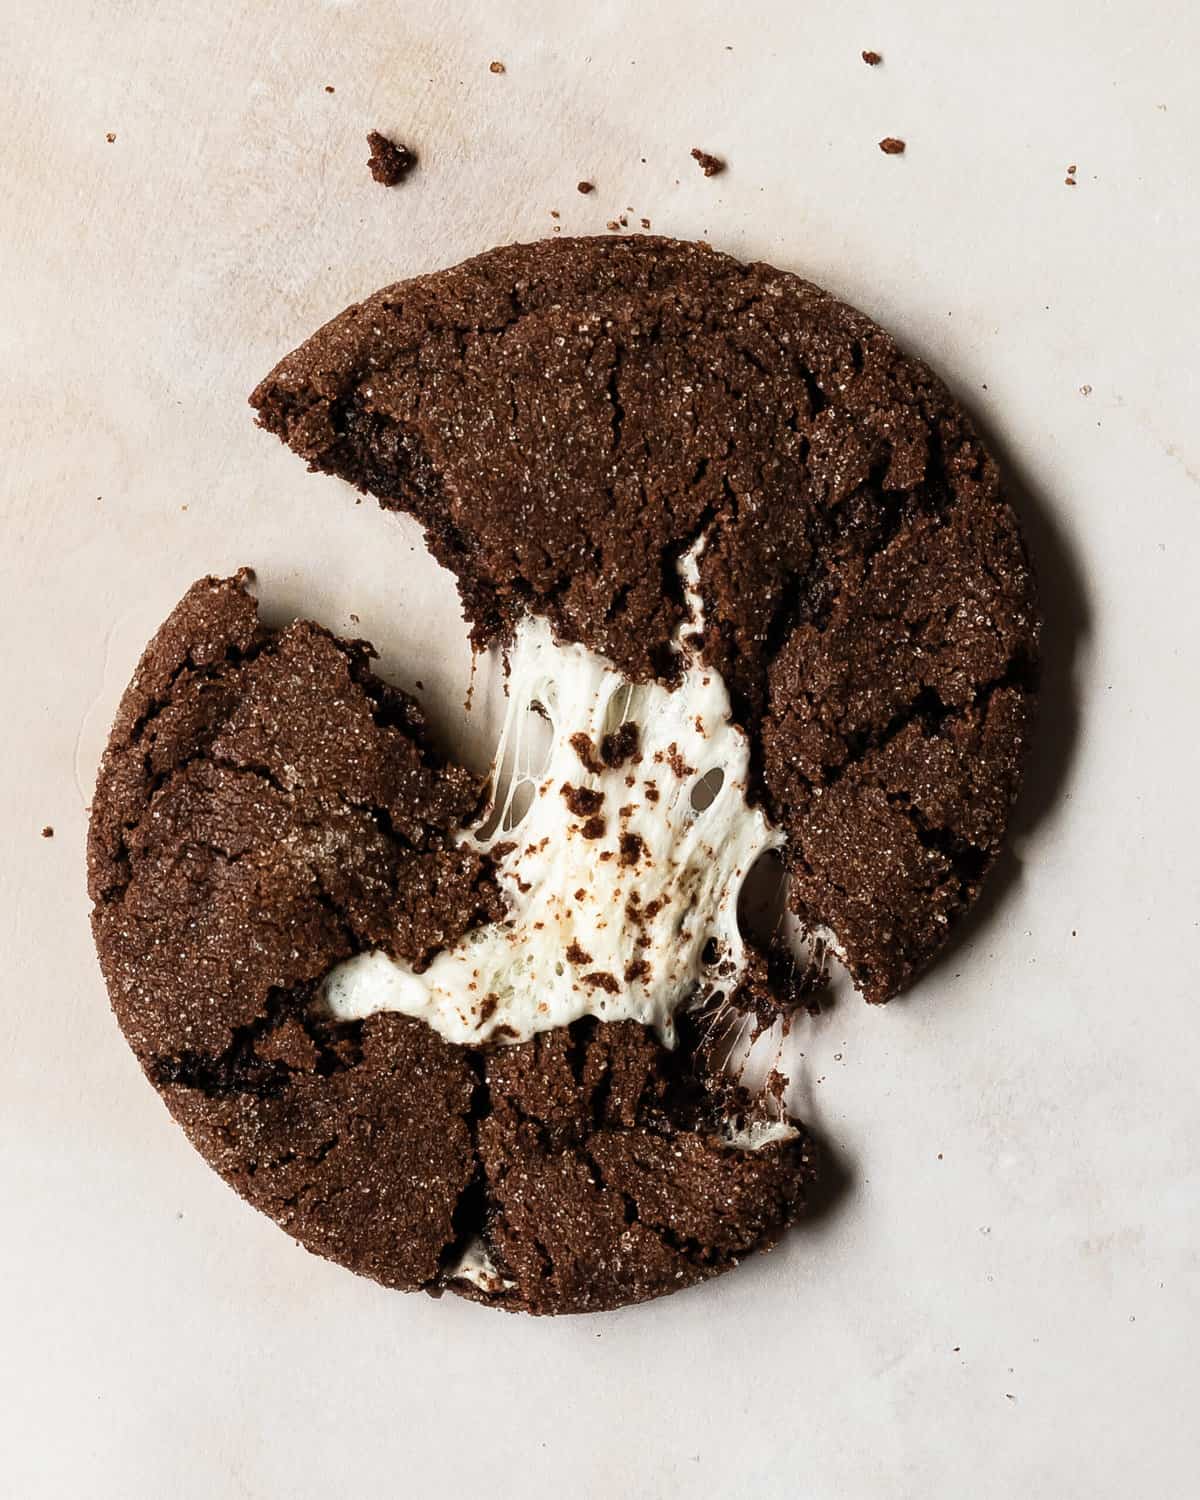 Chocolate marshmallow cookies are fudgy and chewy double chocolate sugar cookies filled with gooey marshmallows, rolled in a sweet, crunchy sugar coating. These marshmallow cookies are incredibly quick and easy to make and taste just like your favorite hot cocoa with marshmallows.